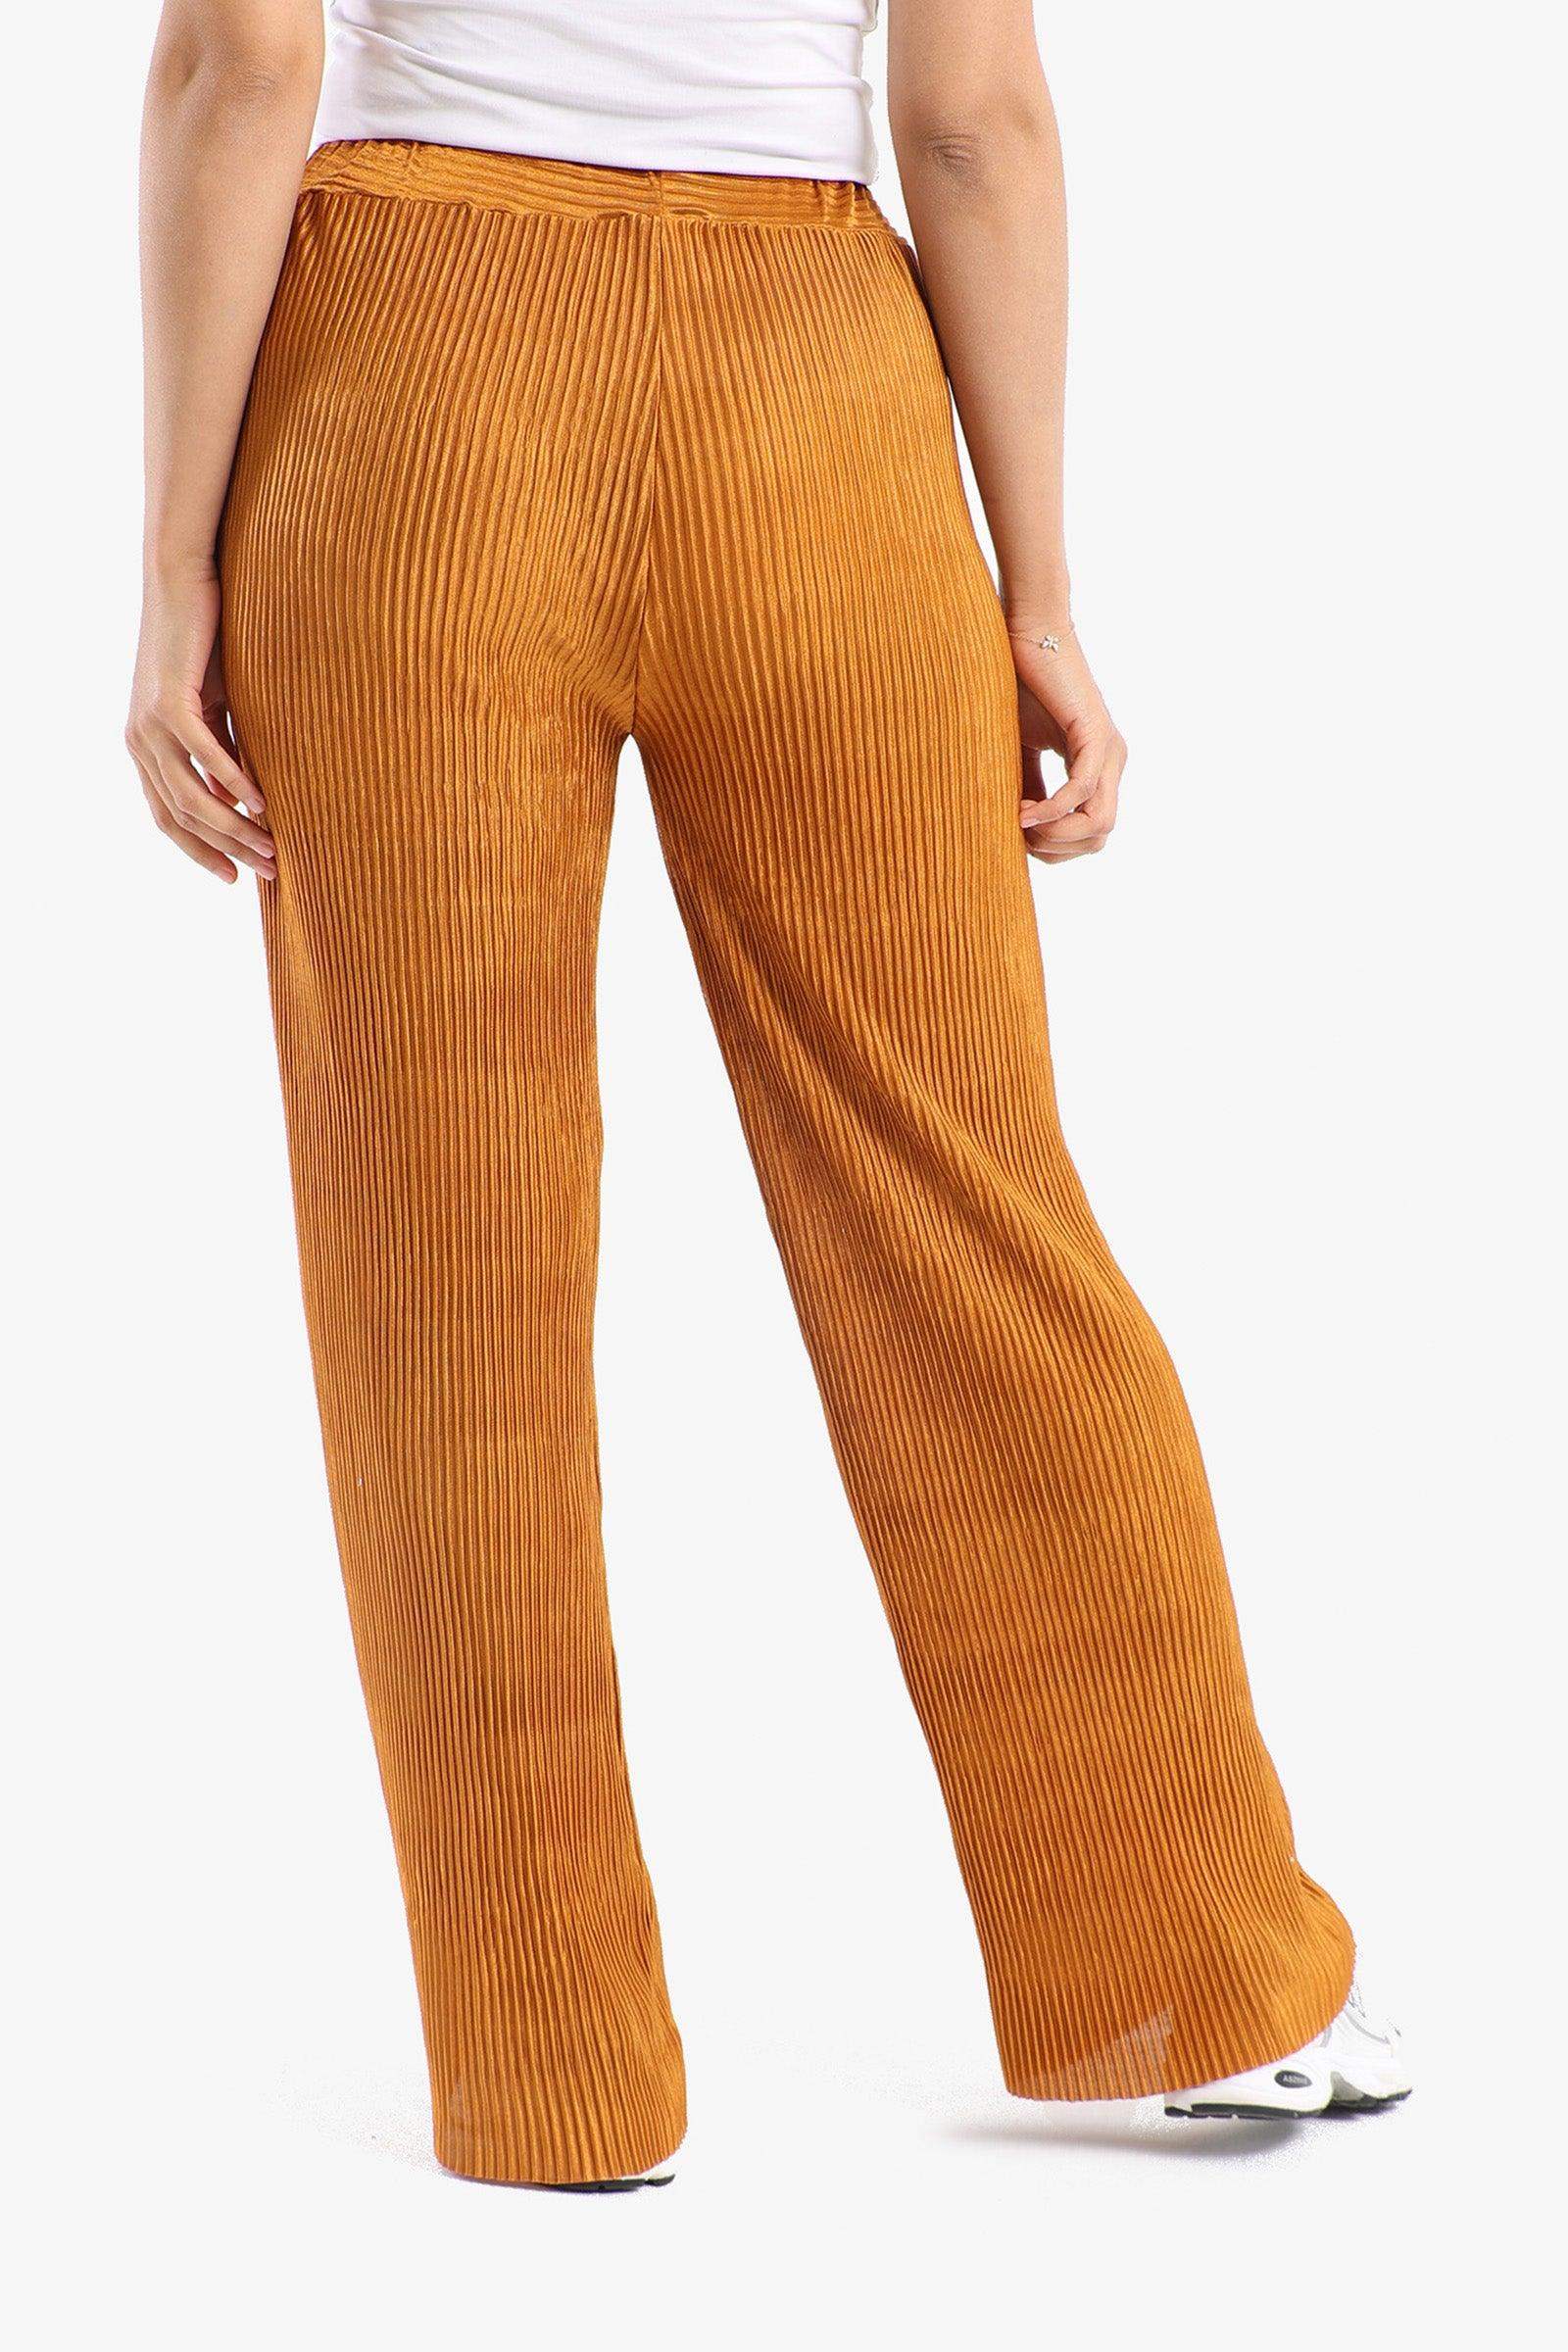 Ribbed Voile Pants - Carina - كارينا